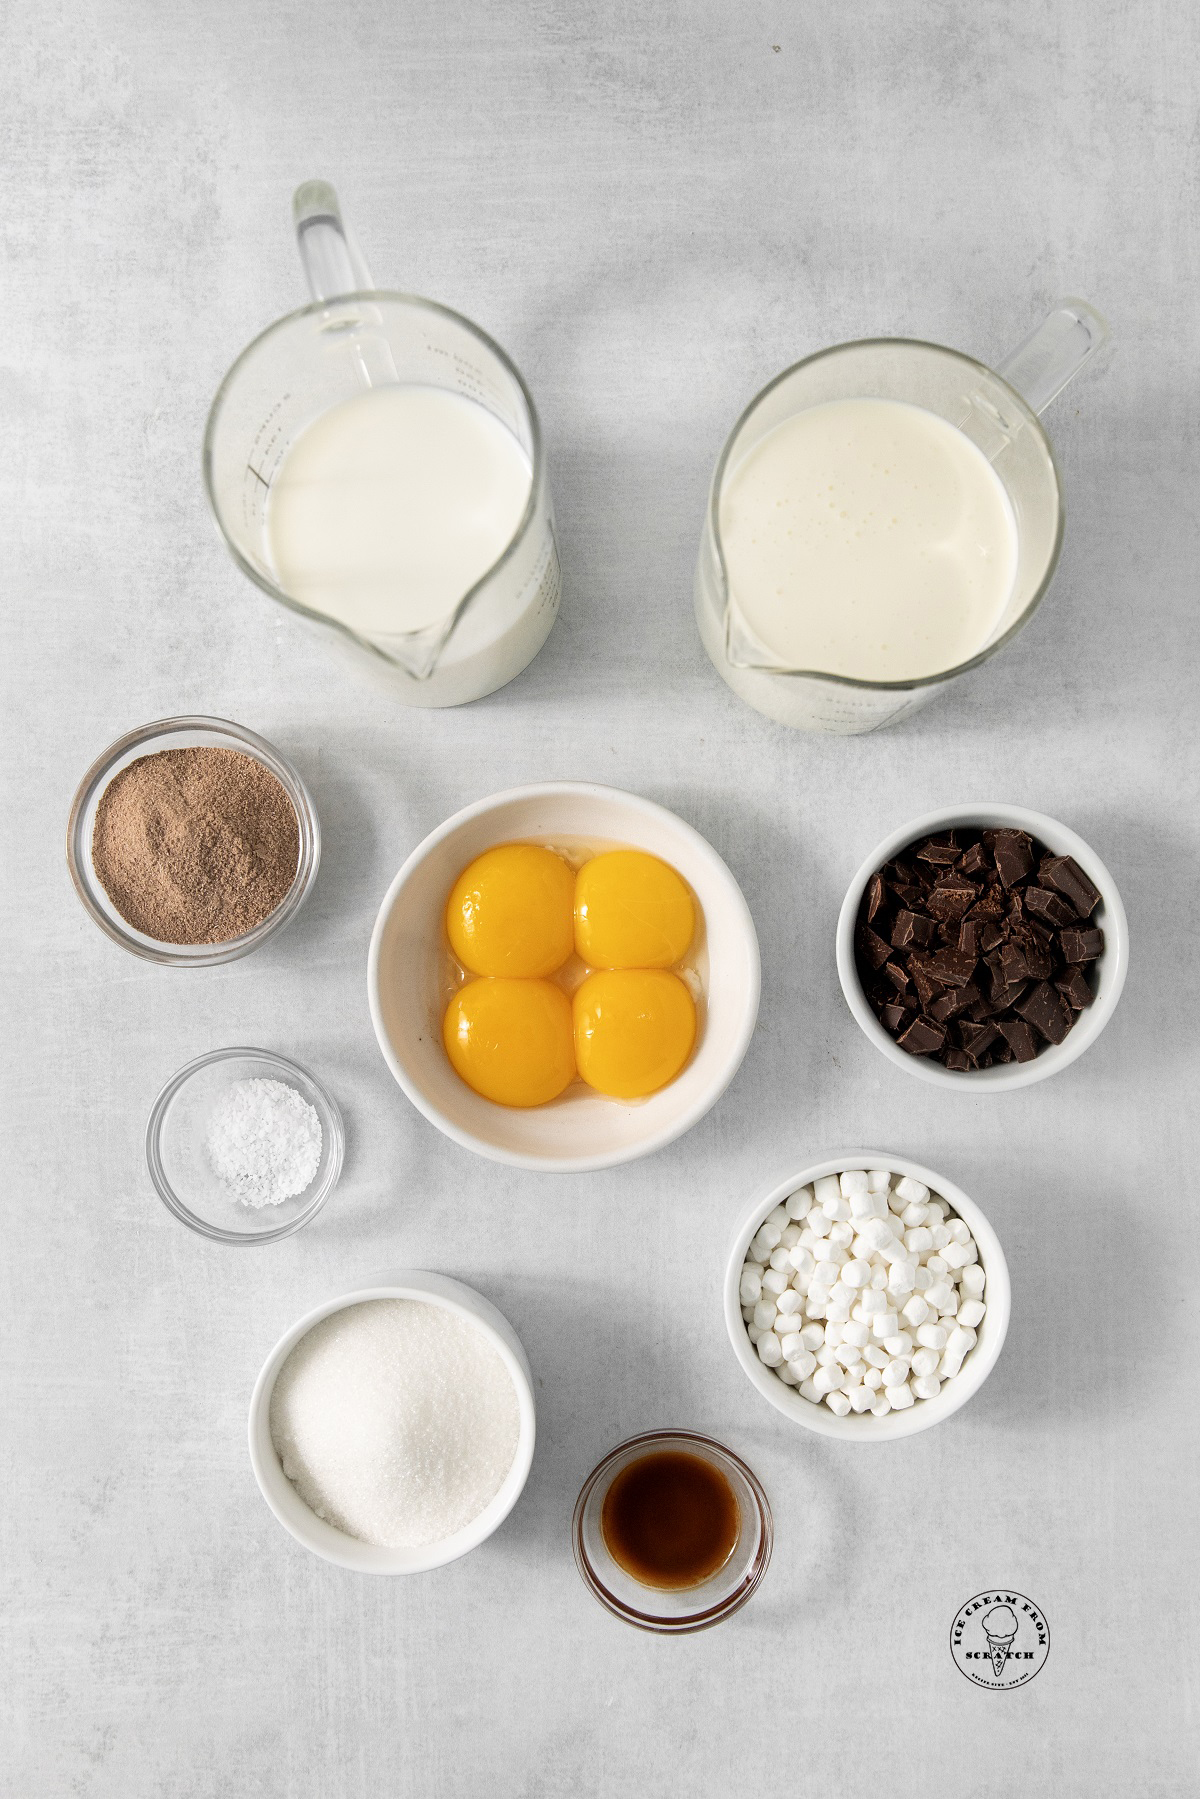 Ingredients for hot chocolate ice cream, all in separate bowls, arranged on a concrete countertop, viewed from above.